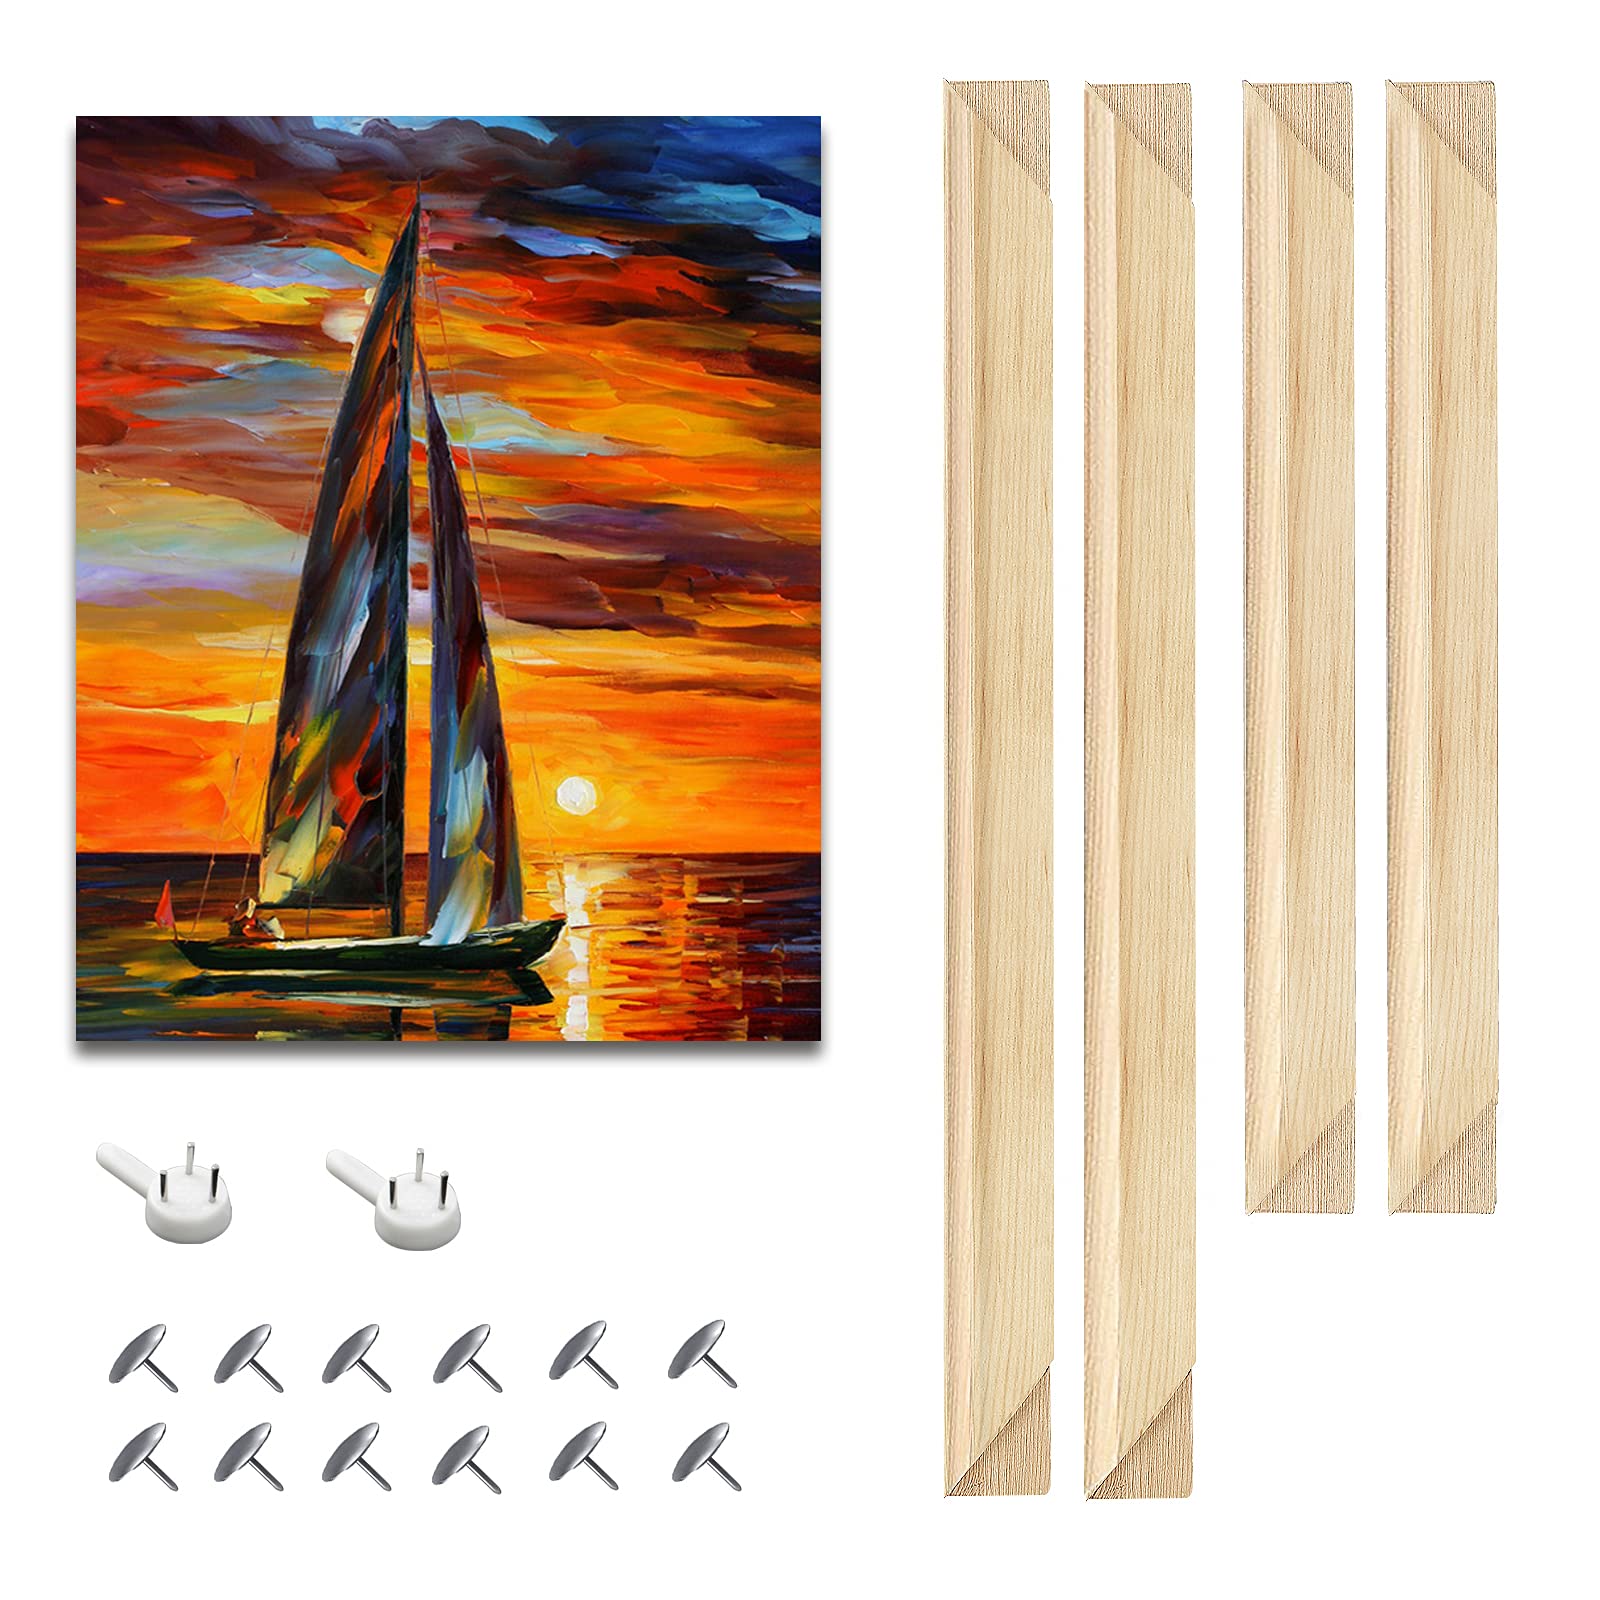 EVNEED DIY Canvas Stretcher Bars 16x20 Inch Canvas Frame - Easy to  Assemble, Gallery Wrap Oil Frame Kits Canvas Wood Stretcher Bars- for Oil  Paintings, Prints, Paint